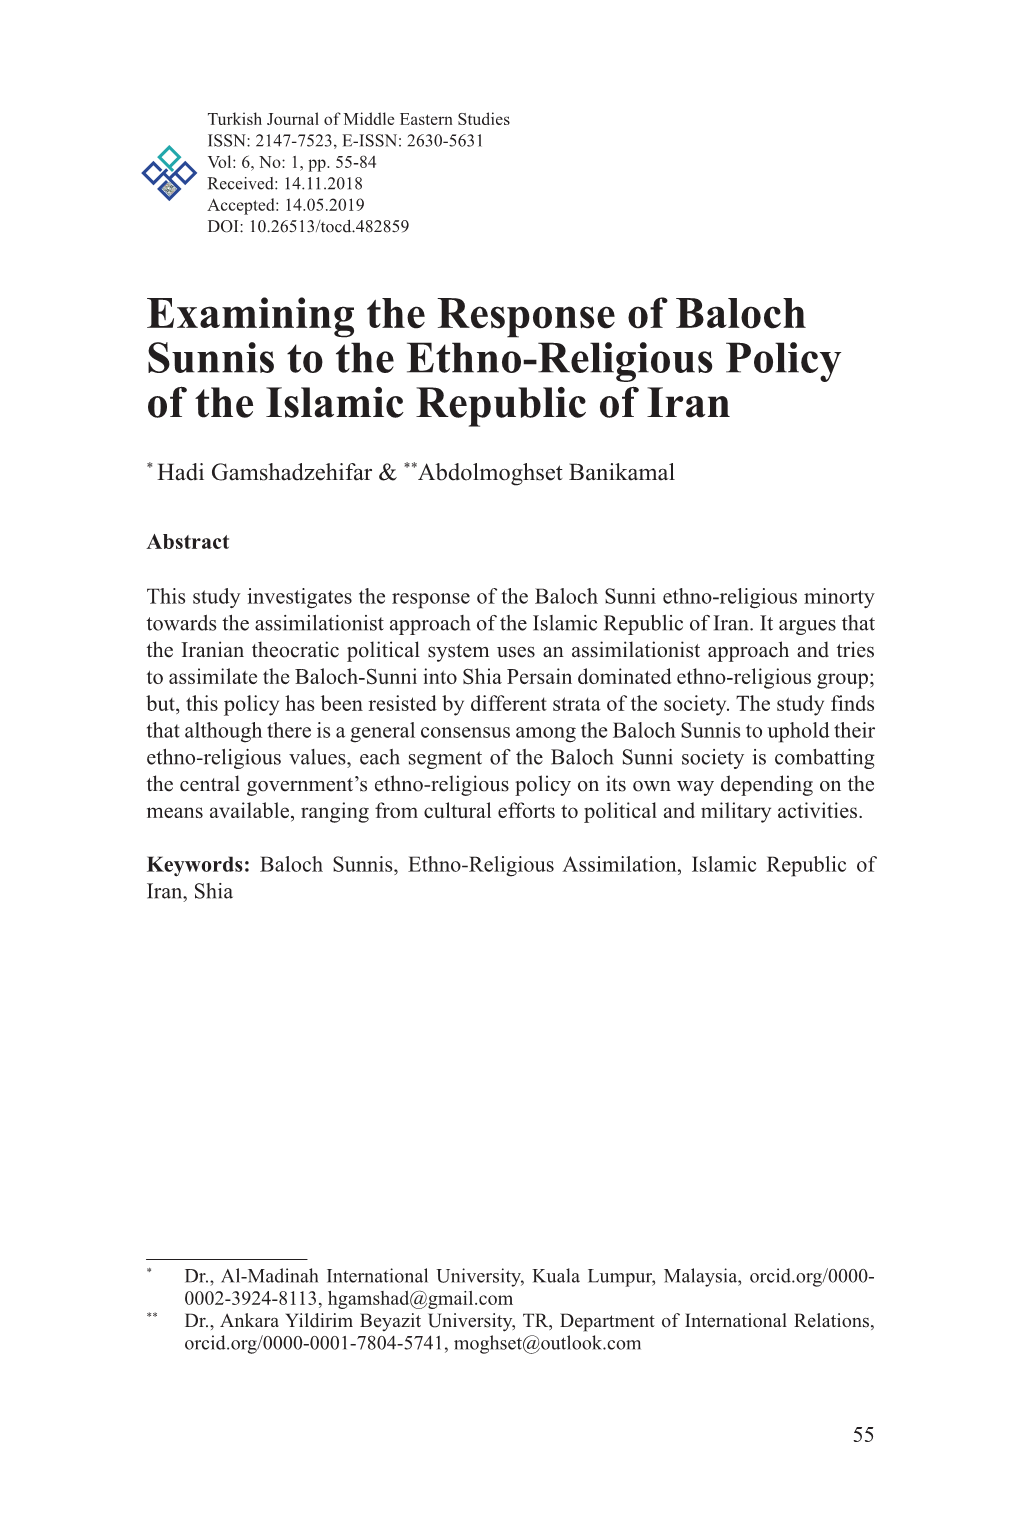 Examining the Response of Baloch Sunnis to the Ethno-Religious Policy of the Islamic Republic of Iran